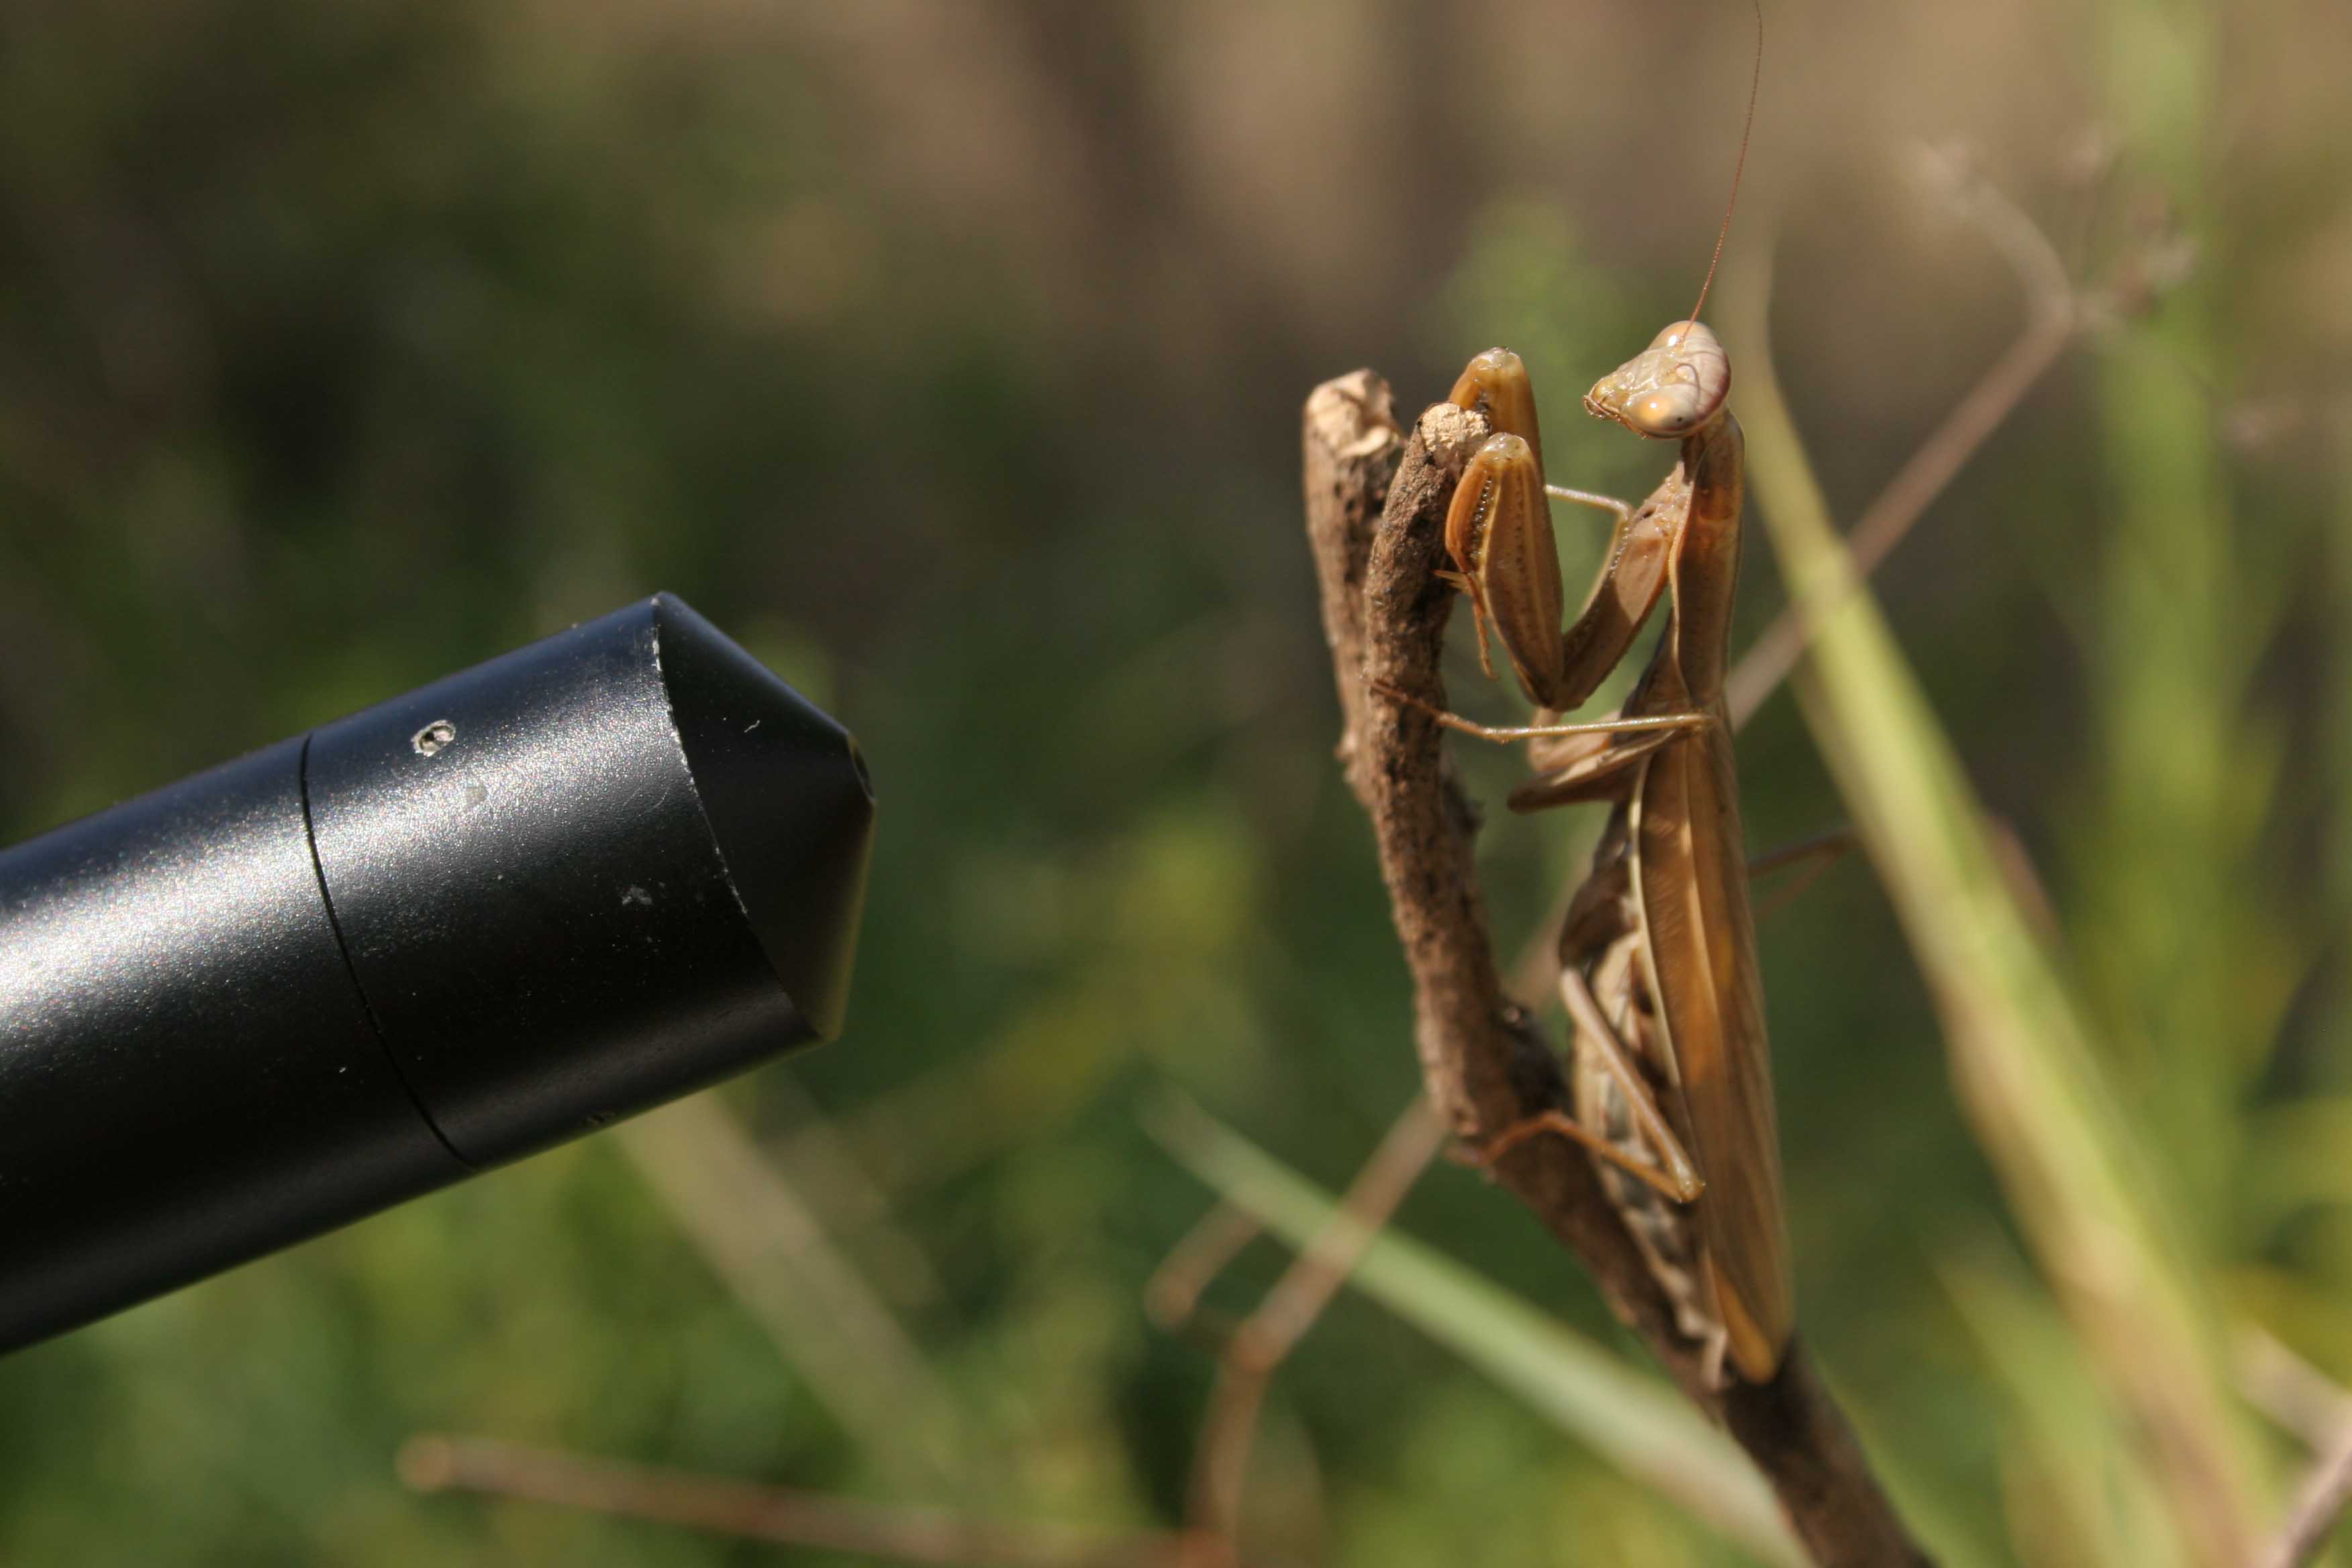 Filming a mantis with a pinhole lens (courtesy of Ammonite Films)